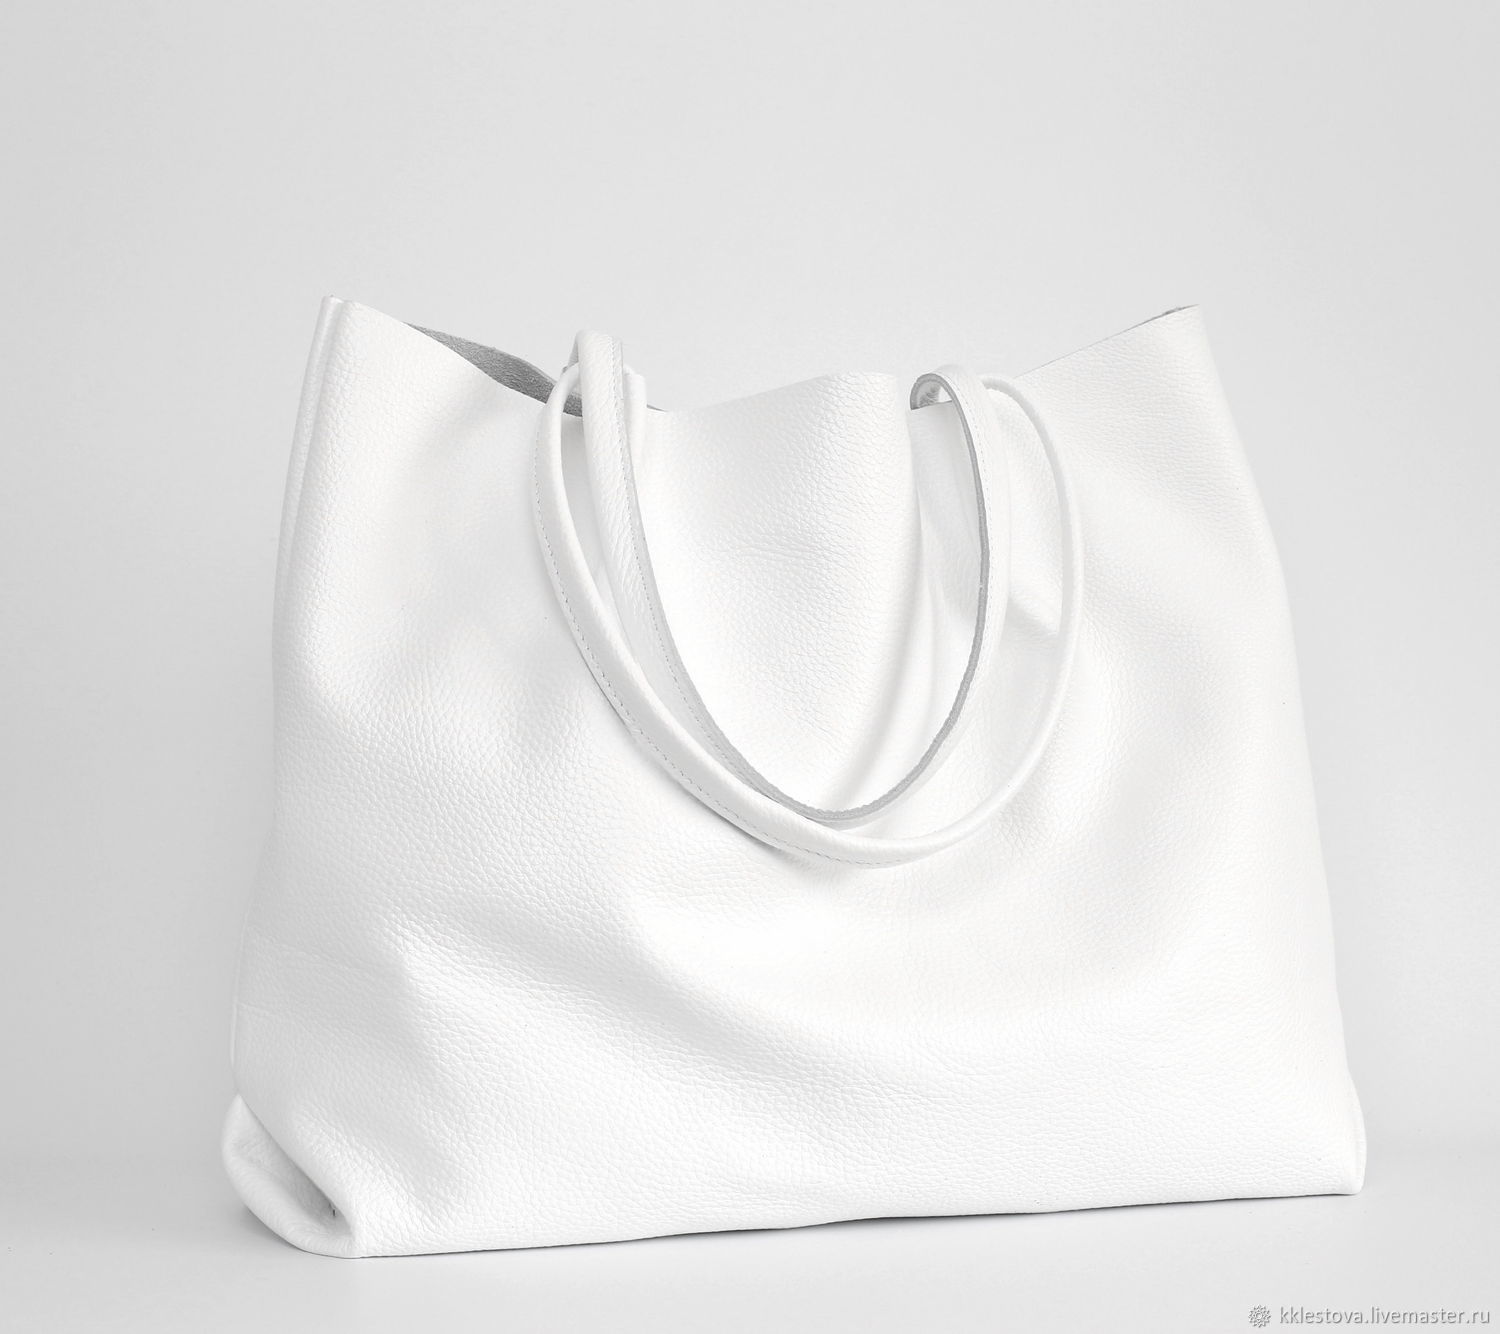 Tote Bag White Leather Shopper Bag Leather Suede Shoulder Bag, Classic Bag, Moscow,  Фото №1